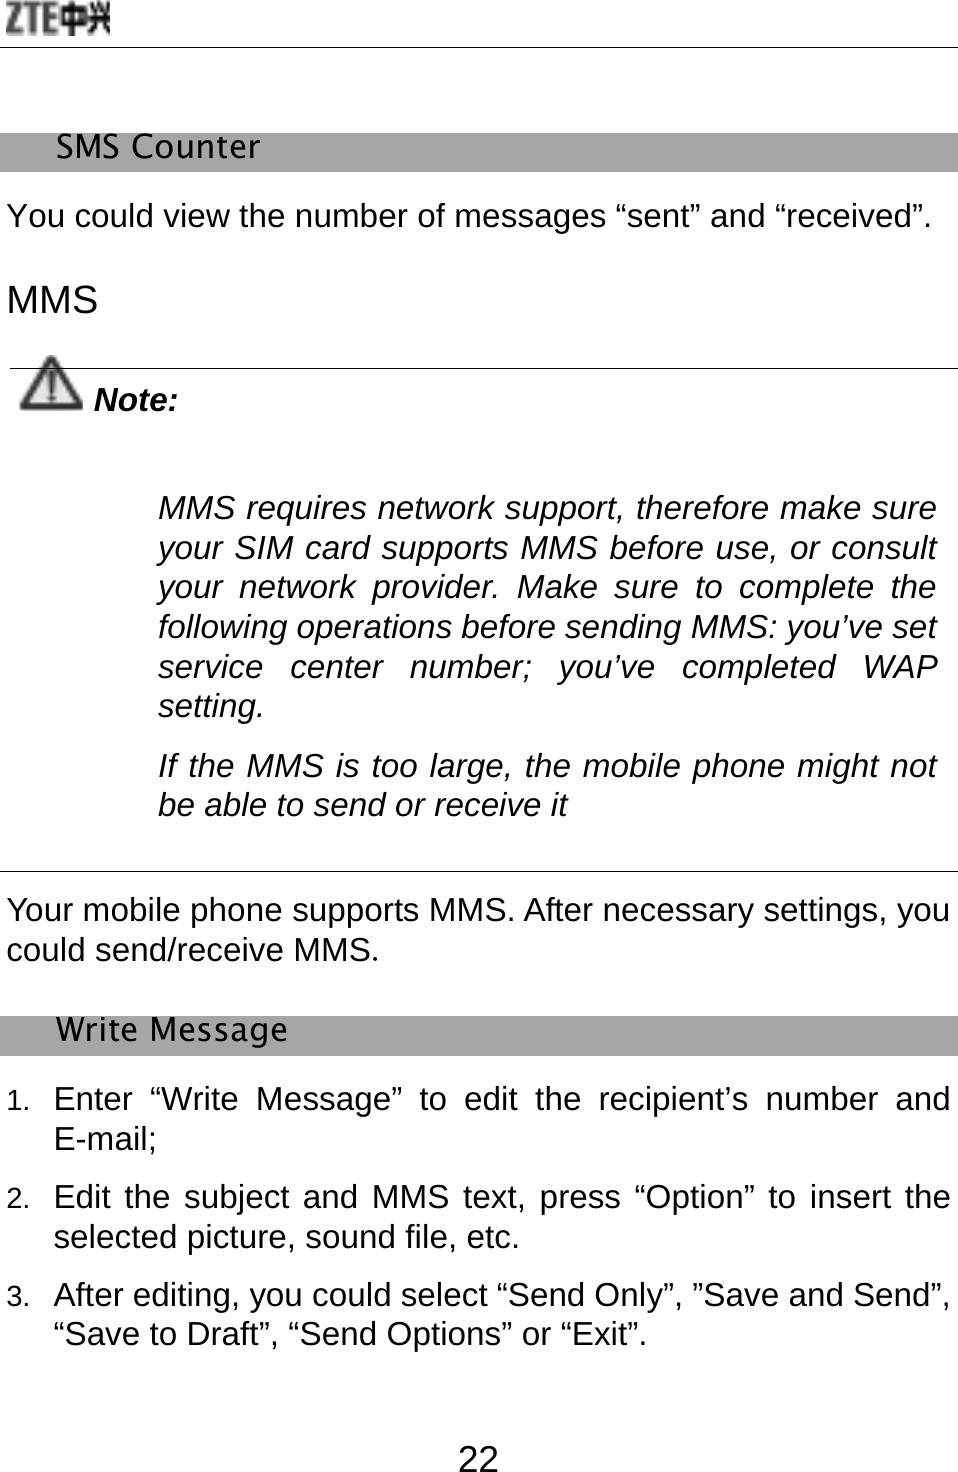  22 SMS Counter   You could view the number of messages “sent” and “received”. MMS  Note: MMS requires network support, therefore make sure your SIM card supports MMS before use, or consult your network provider. Make sure to complete the following operations before sending MMS: you’ve set service center number; you’ve completed WAP setting. If the MMS is too large, the mobile phone might not be able to send or receive it  Your mobile phone supports MMS. After necessary settings, you could send/receive MMS.  Write Message 1.  Enter “Write Message” to edit the recipient’s number and E-mail; 2.  Edit the subject and MMS text, press “Option” to insert the selected picture, sound file, etc. 3.  After editing, you could select “Send Only”, ”Save and Send”, “Save to Draft”, “Send Options” or “Exit”.  